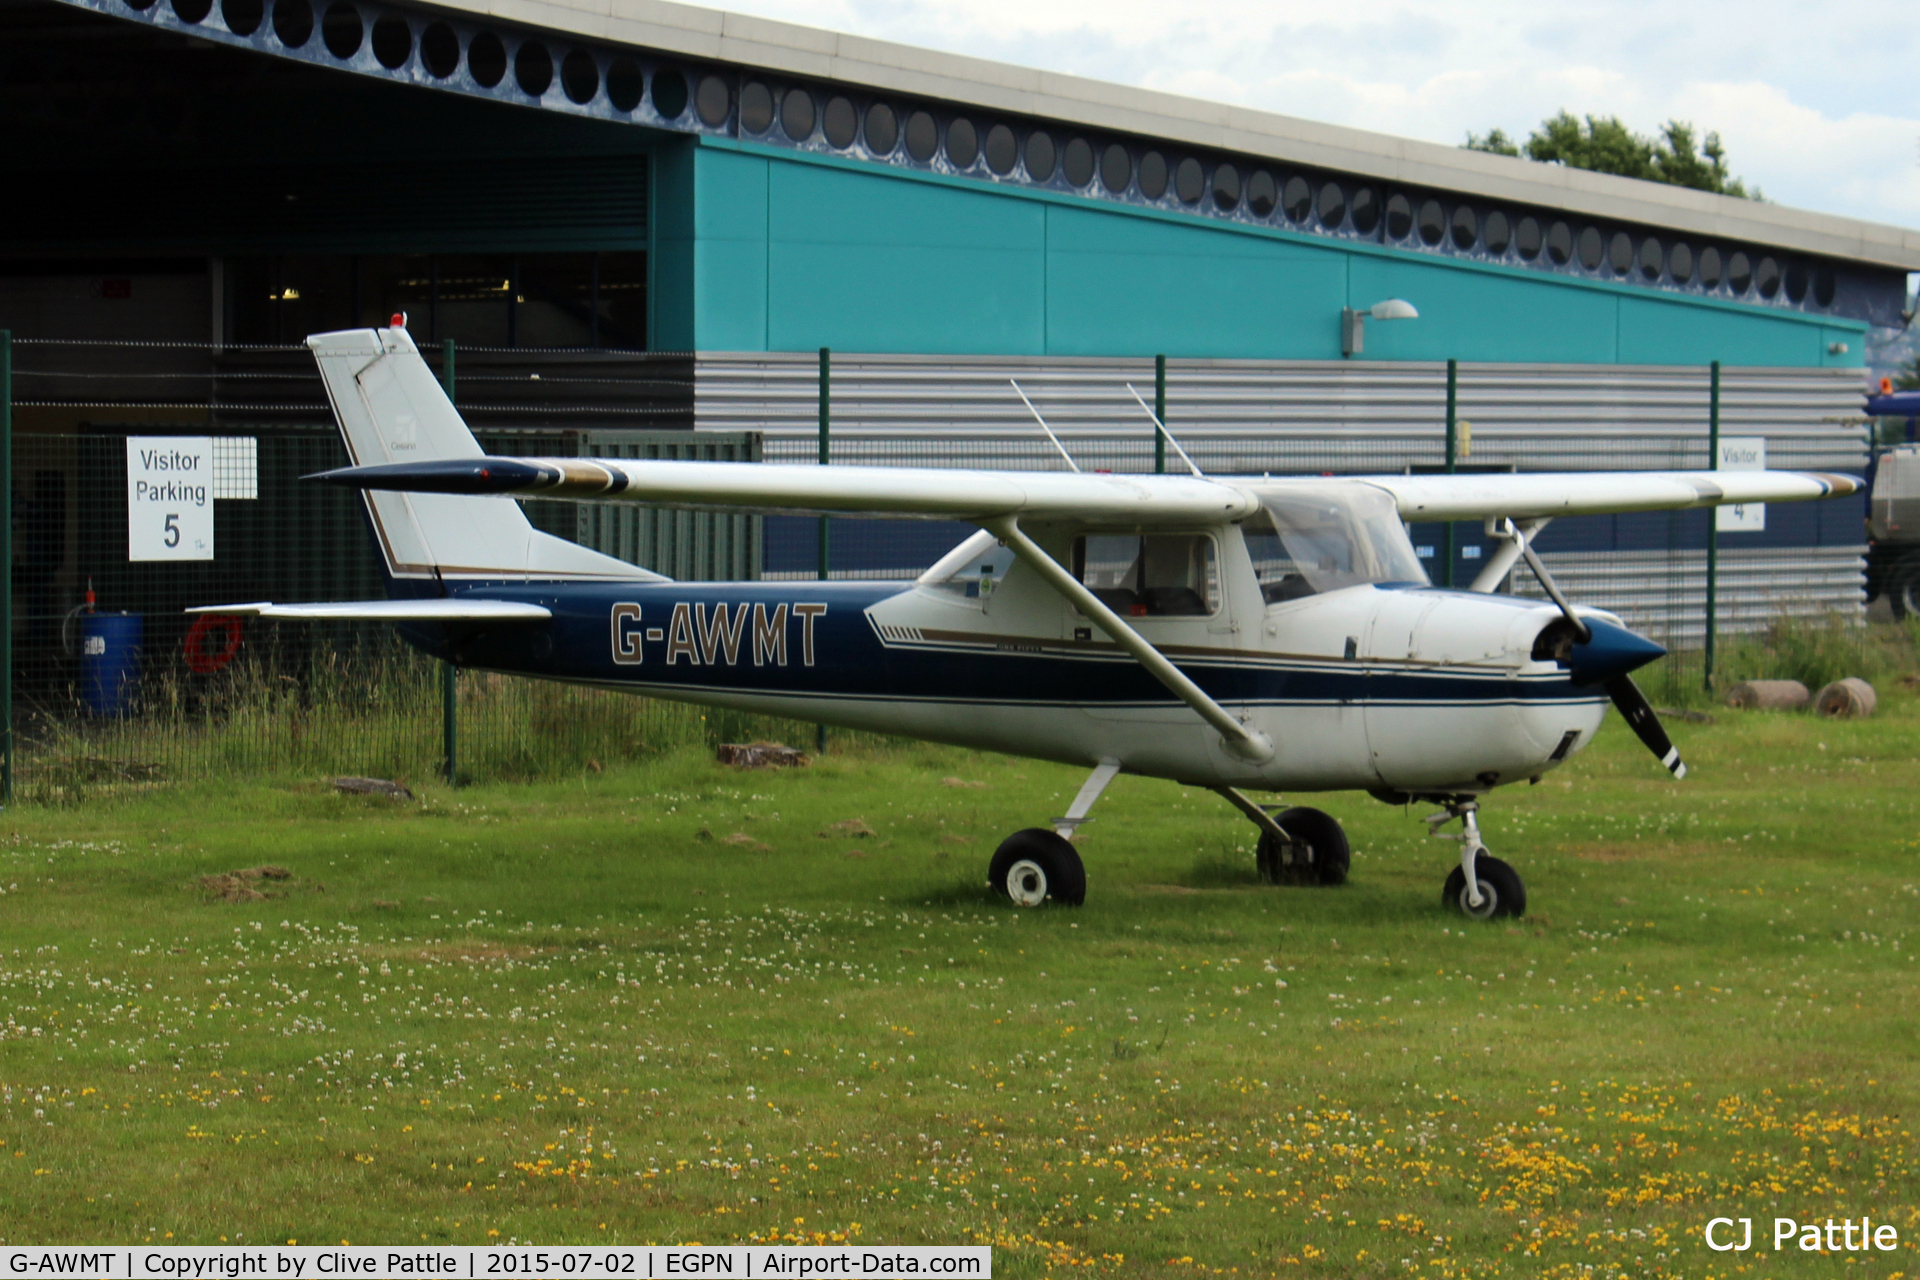 G-AWMT, 1968 Reims F150H C/N 0360, Parked up in Visitor Bay No.5 at Dundee Riverside Airport EGPN